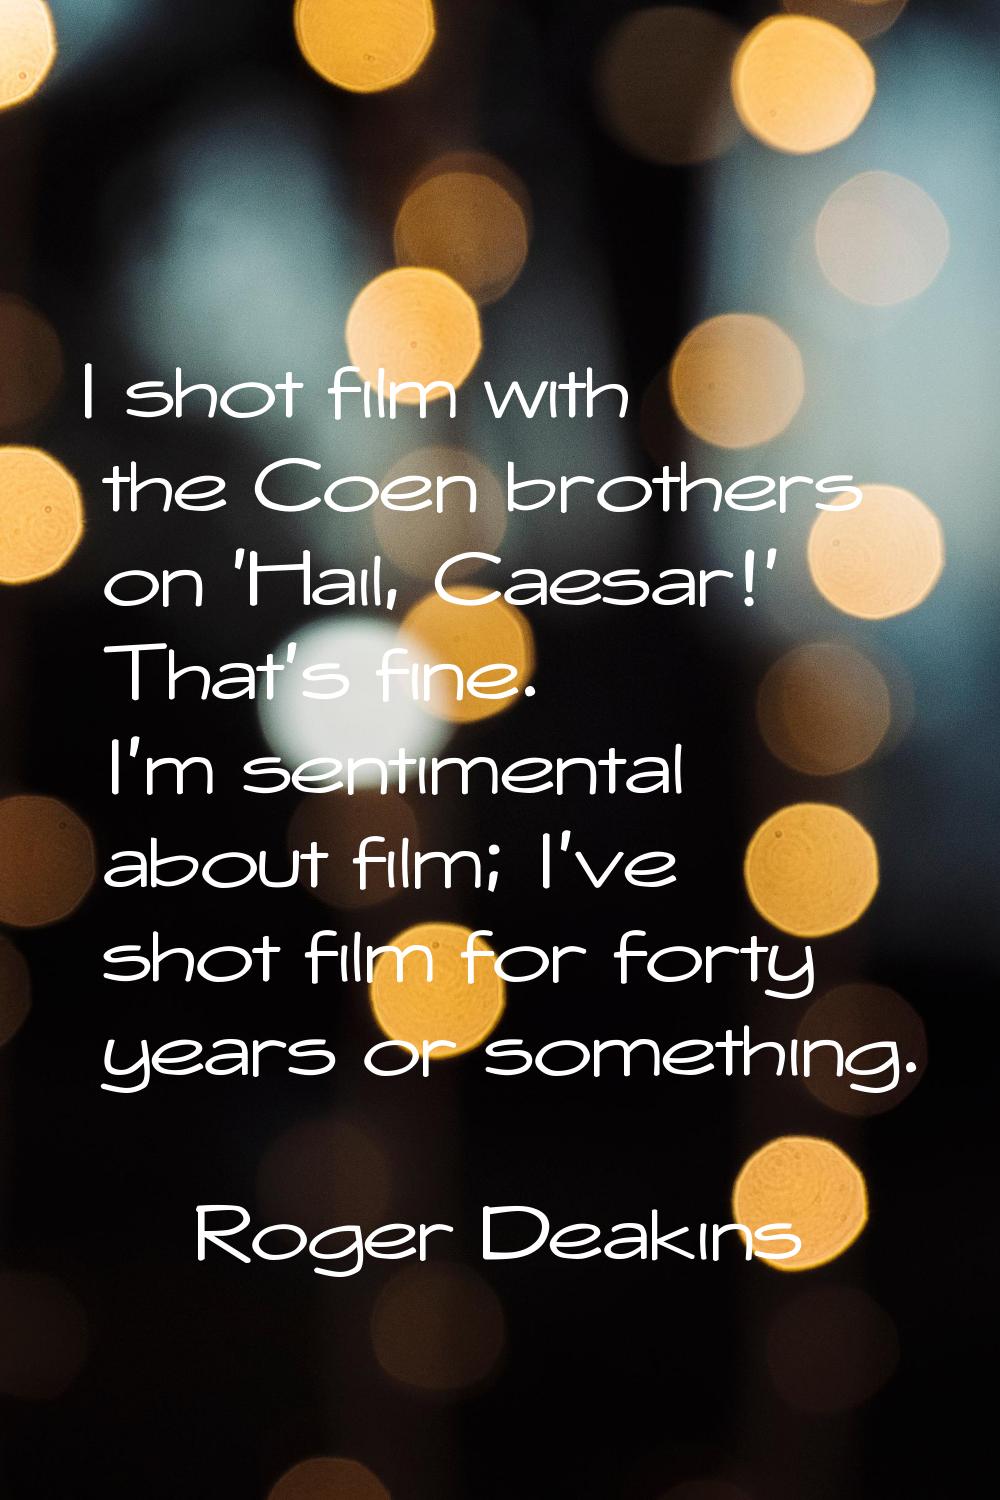 I shot film with the Coen brothers on 'Hail, Caesar!' That's fine. I'm sentimental about film; I've